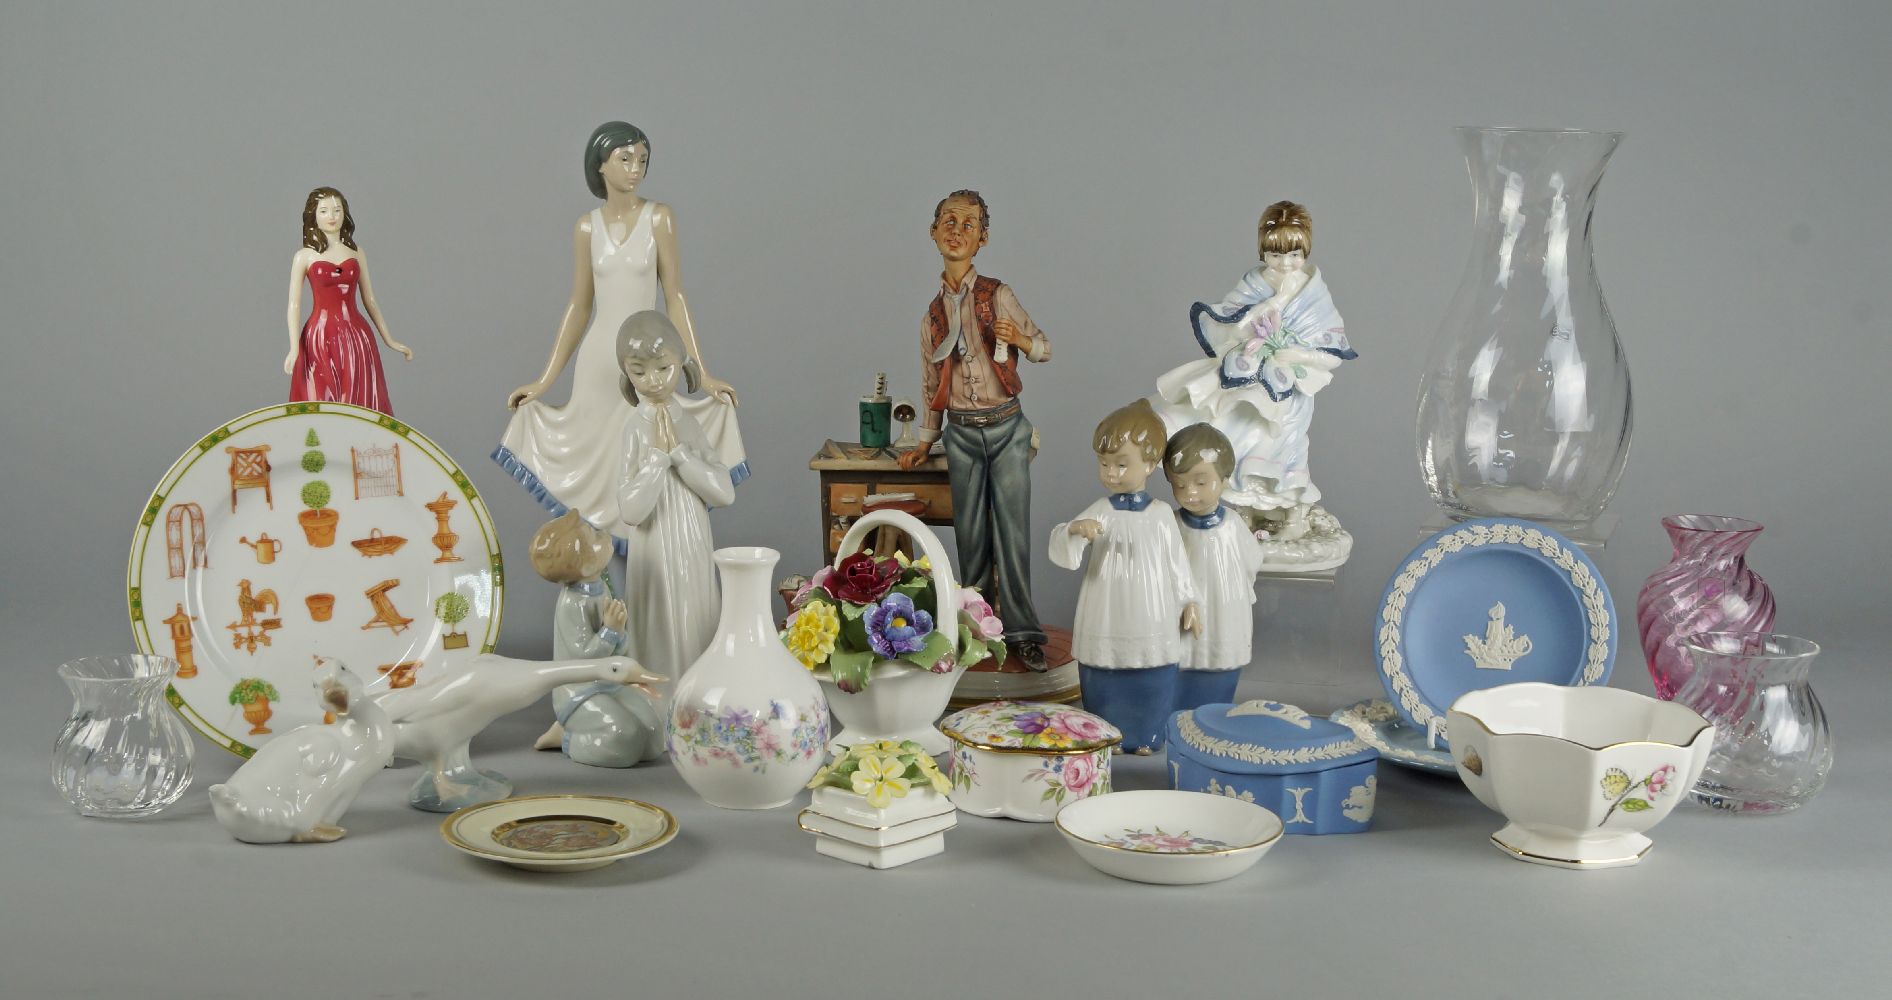 A Nao figure of a girl in a white dress. 20th century, together with two groups of Nao and Lladro